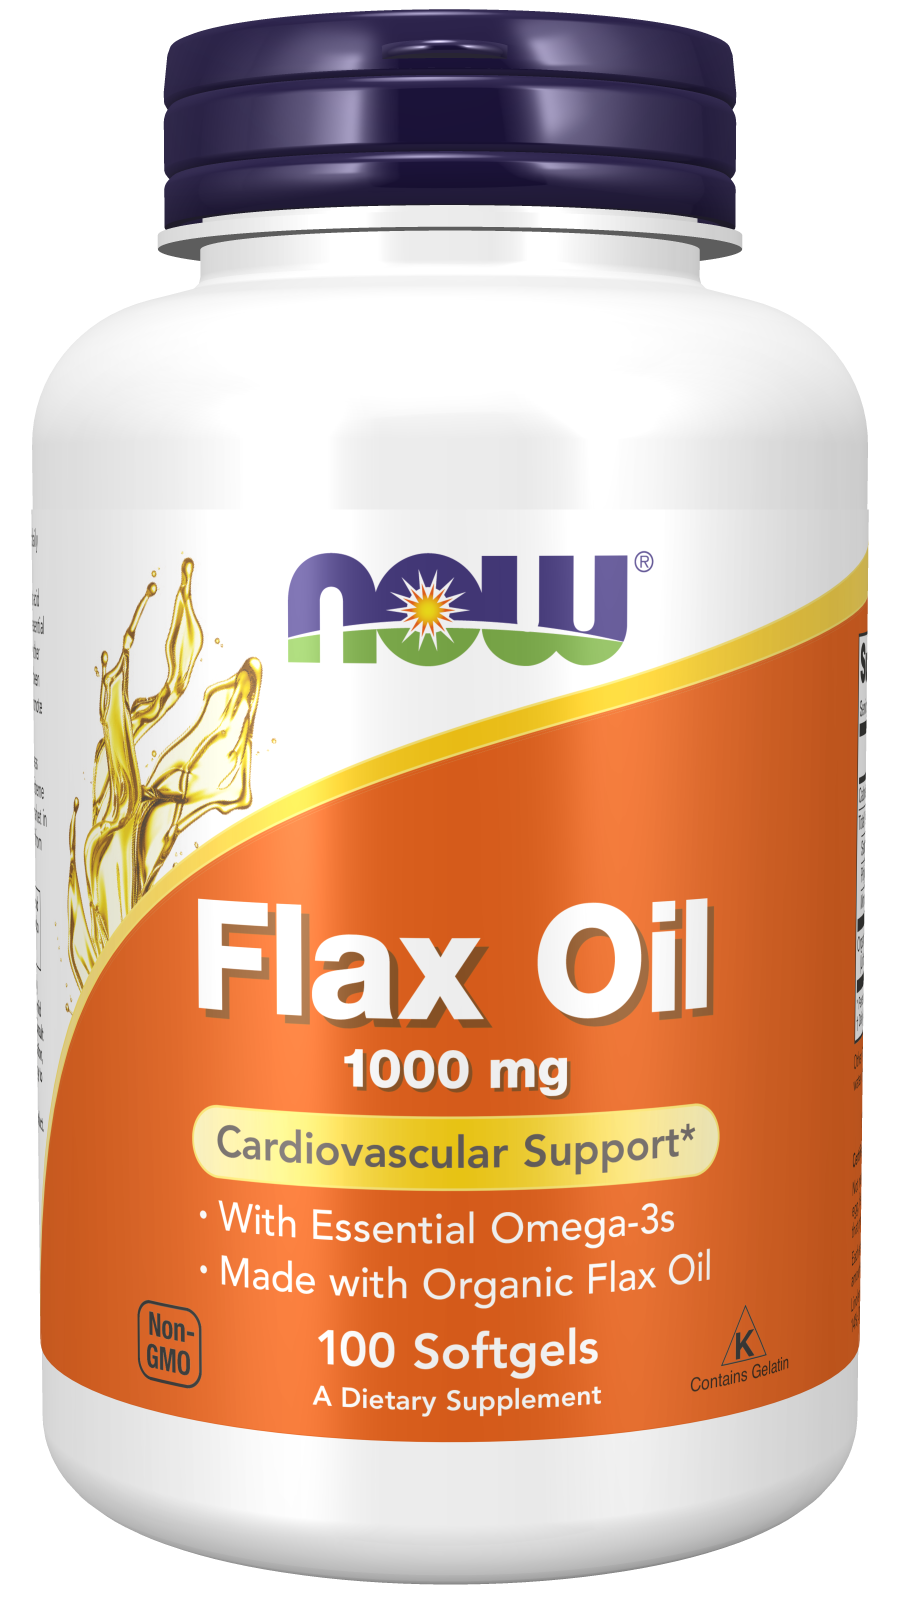 NOW foods - Flax Oil  #1770